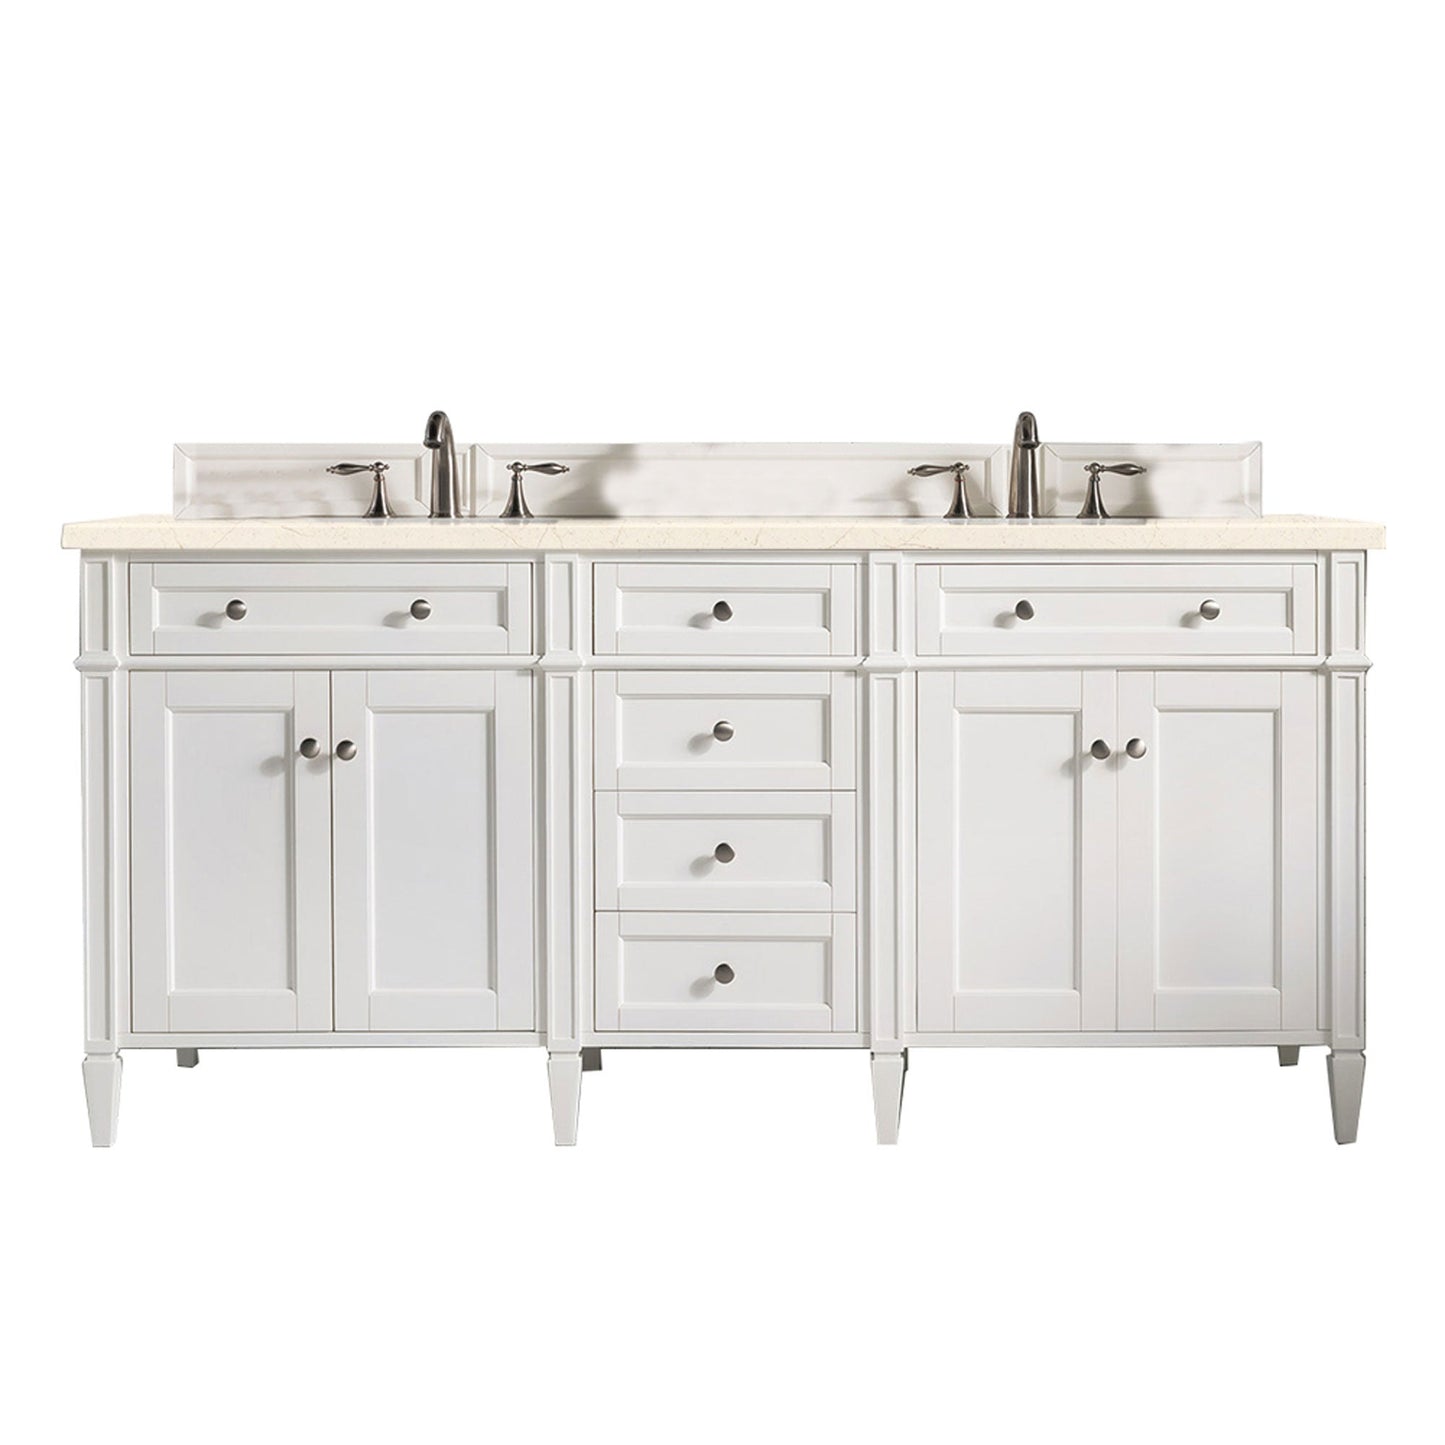 James Martin Vanities Brittany 72" Bright White Double Vanity With 3cm Eternal Marfil Quartz Top